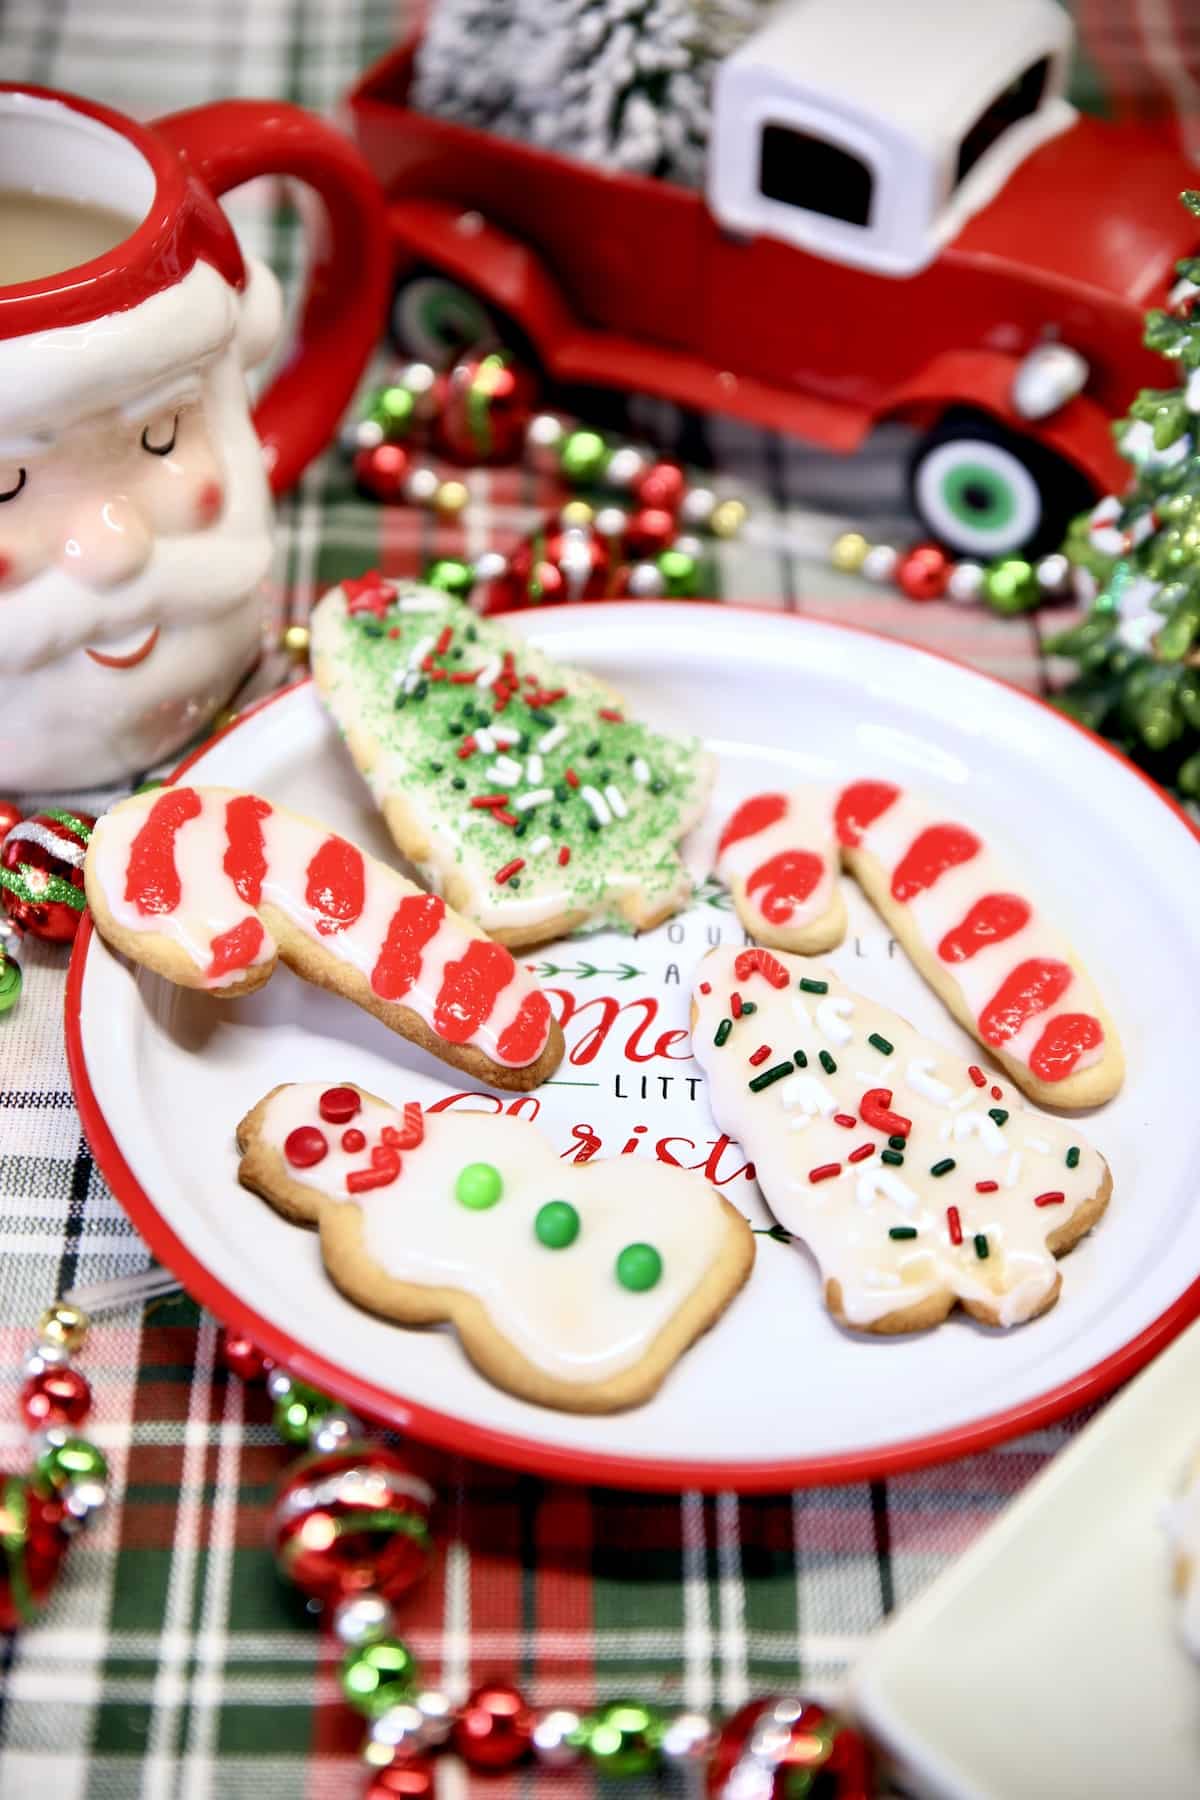 Plate of decorated sugar cookies with Christmas decor.